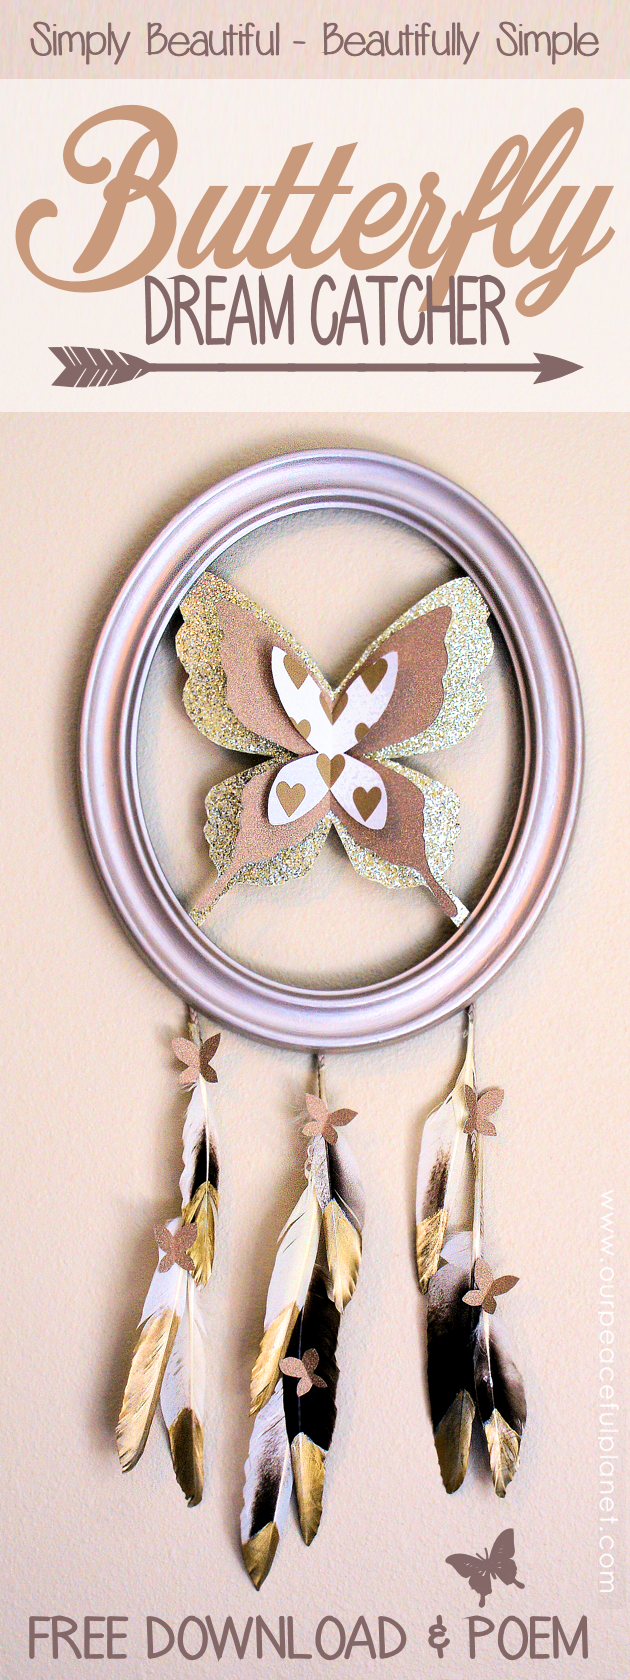 Make this beautiful butterfly dream catcher with a frame and some paper. Attach the very special poem and it makes a meaningful gift for adults or children!